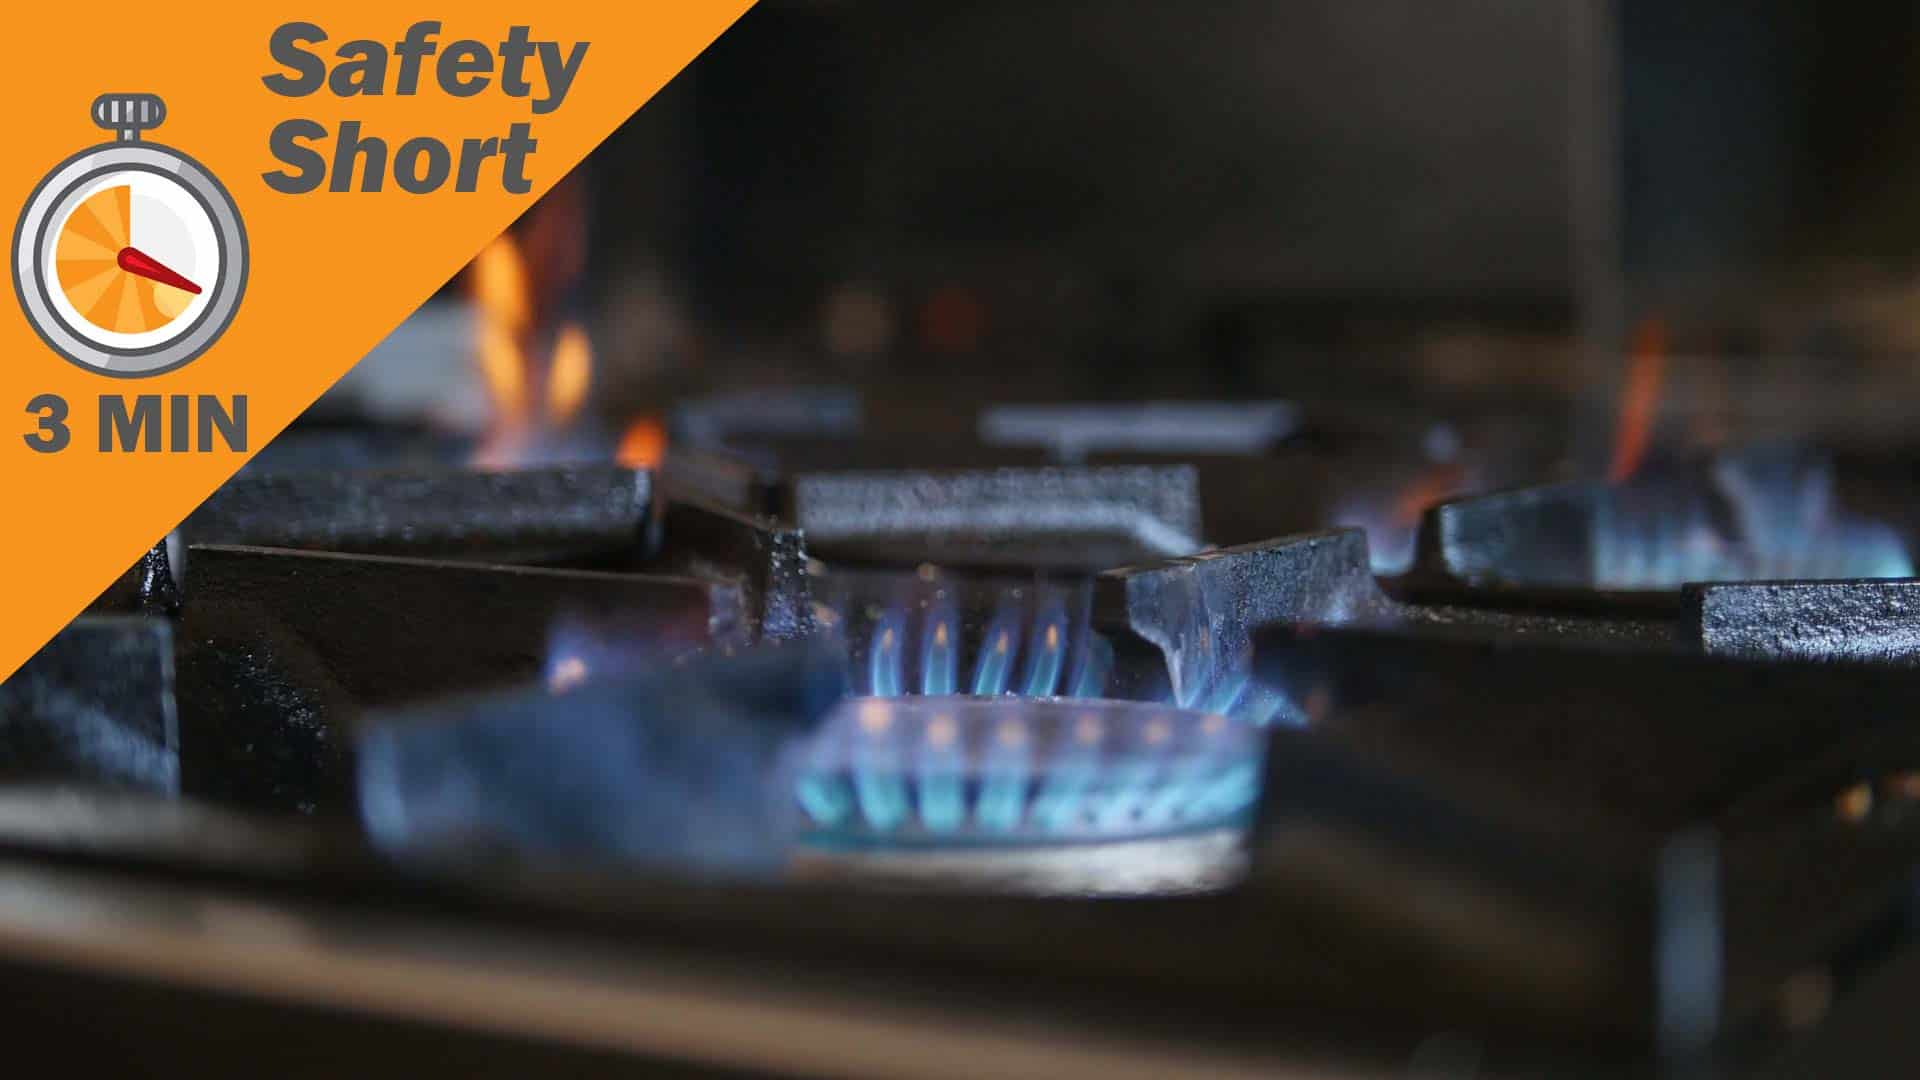 Kitchen Safety and Food Hygiene – Working with Heat [Safety Short]